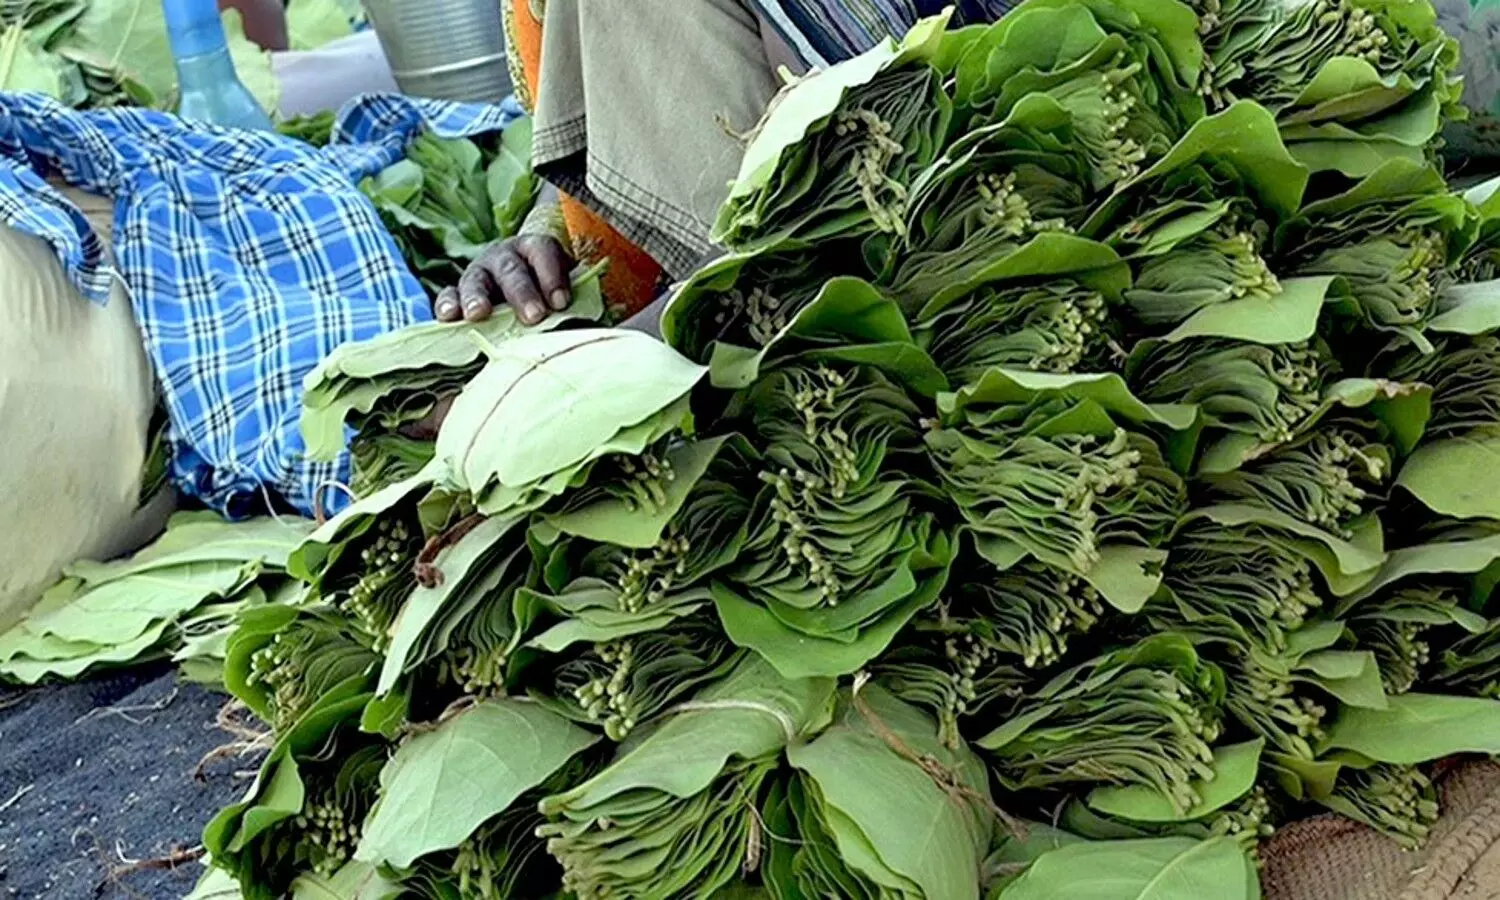 Green gold is available in Chhattisgarh